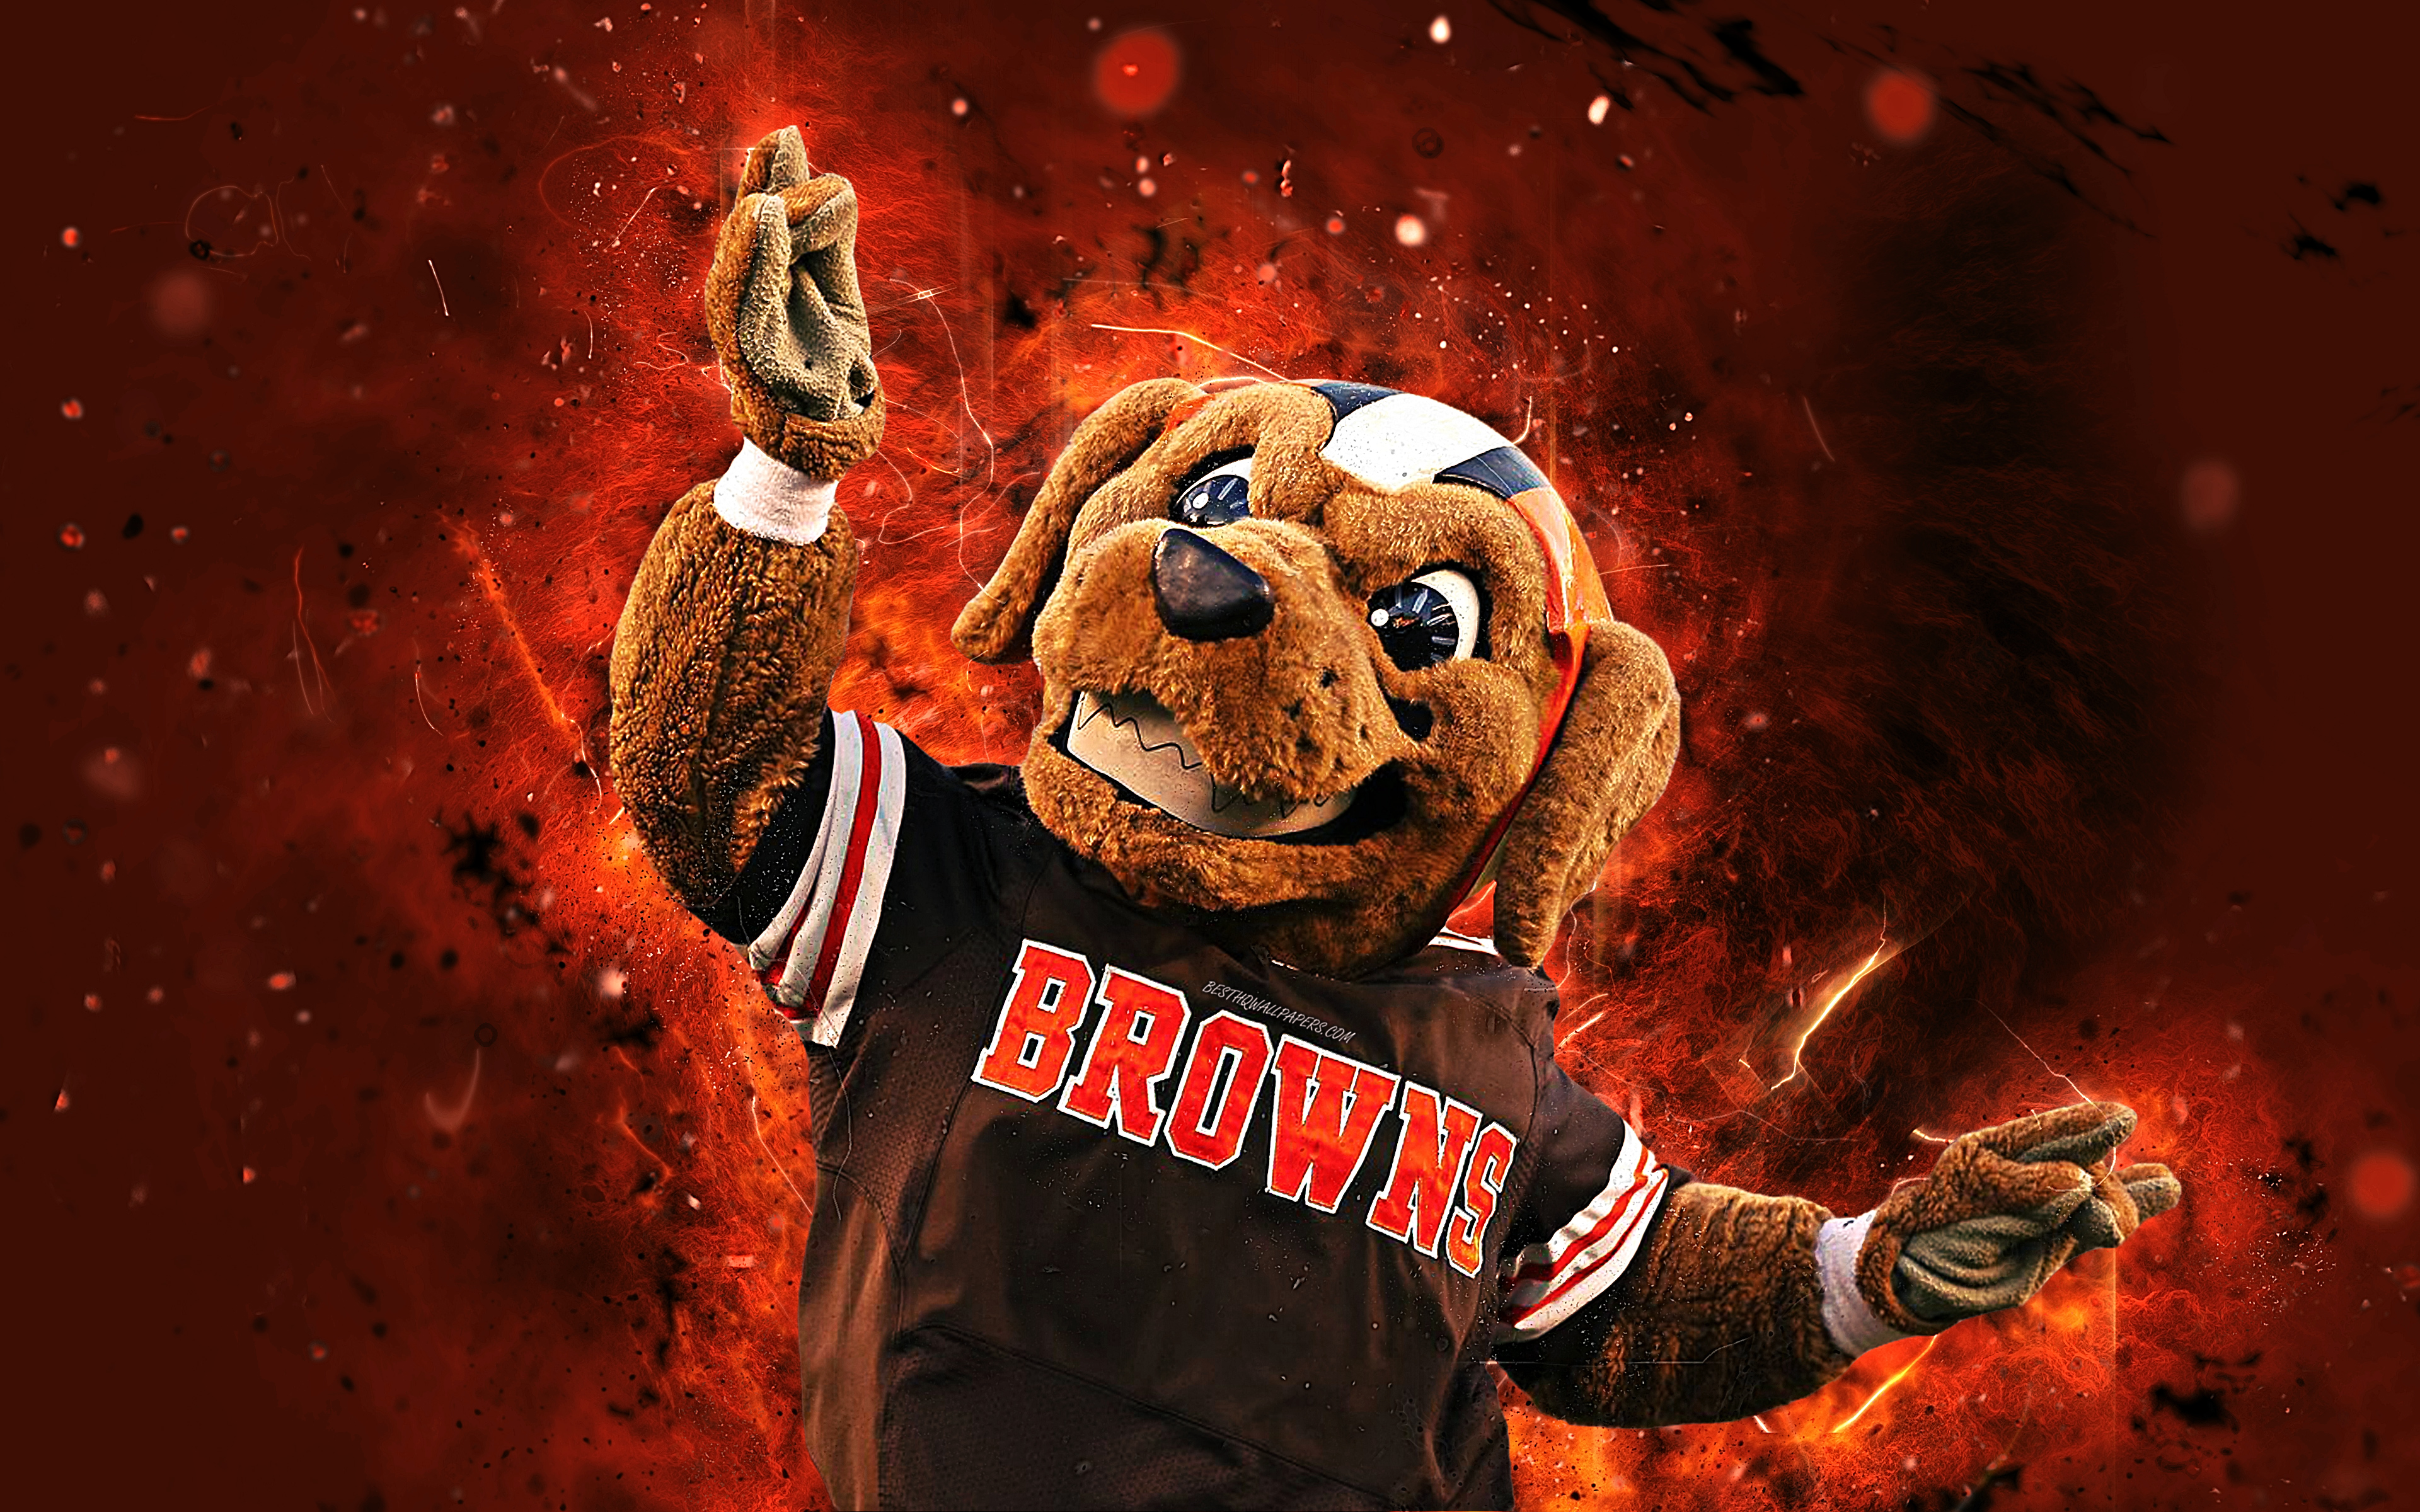 Download wallpaper Chomps, 4k, mascot, Cleveland Browns, abstract art, NFL, creative, USA, Cleveland Browns mascot, National Football League, NFL mascots, official mascot for desktop with resolution 3840x2400. High Quality HD picture wallpaper